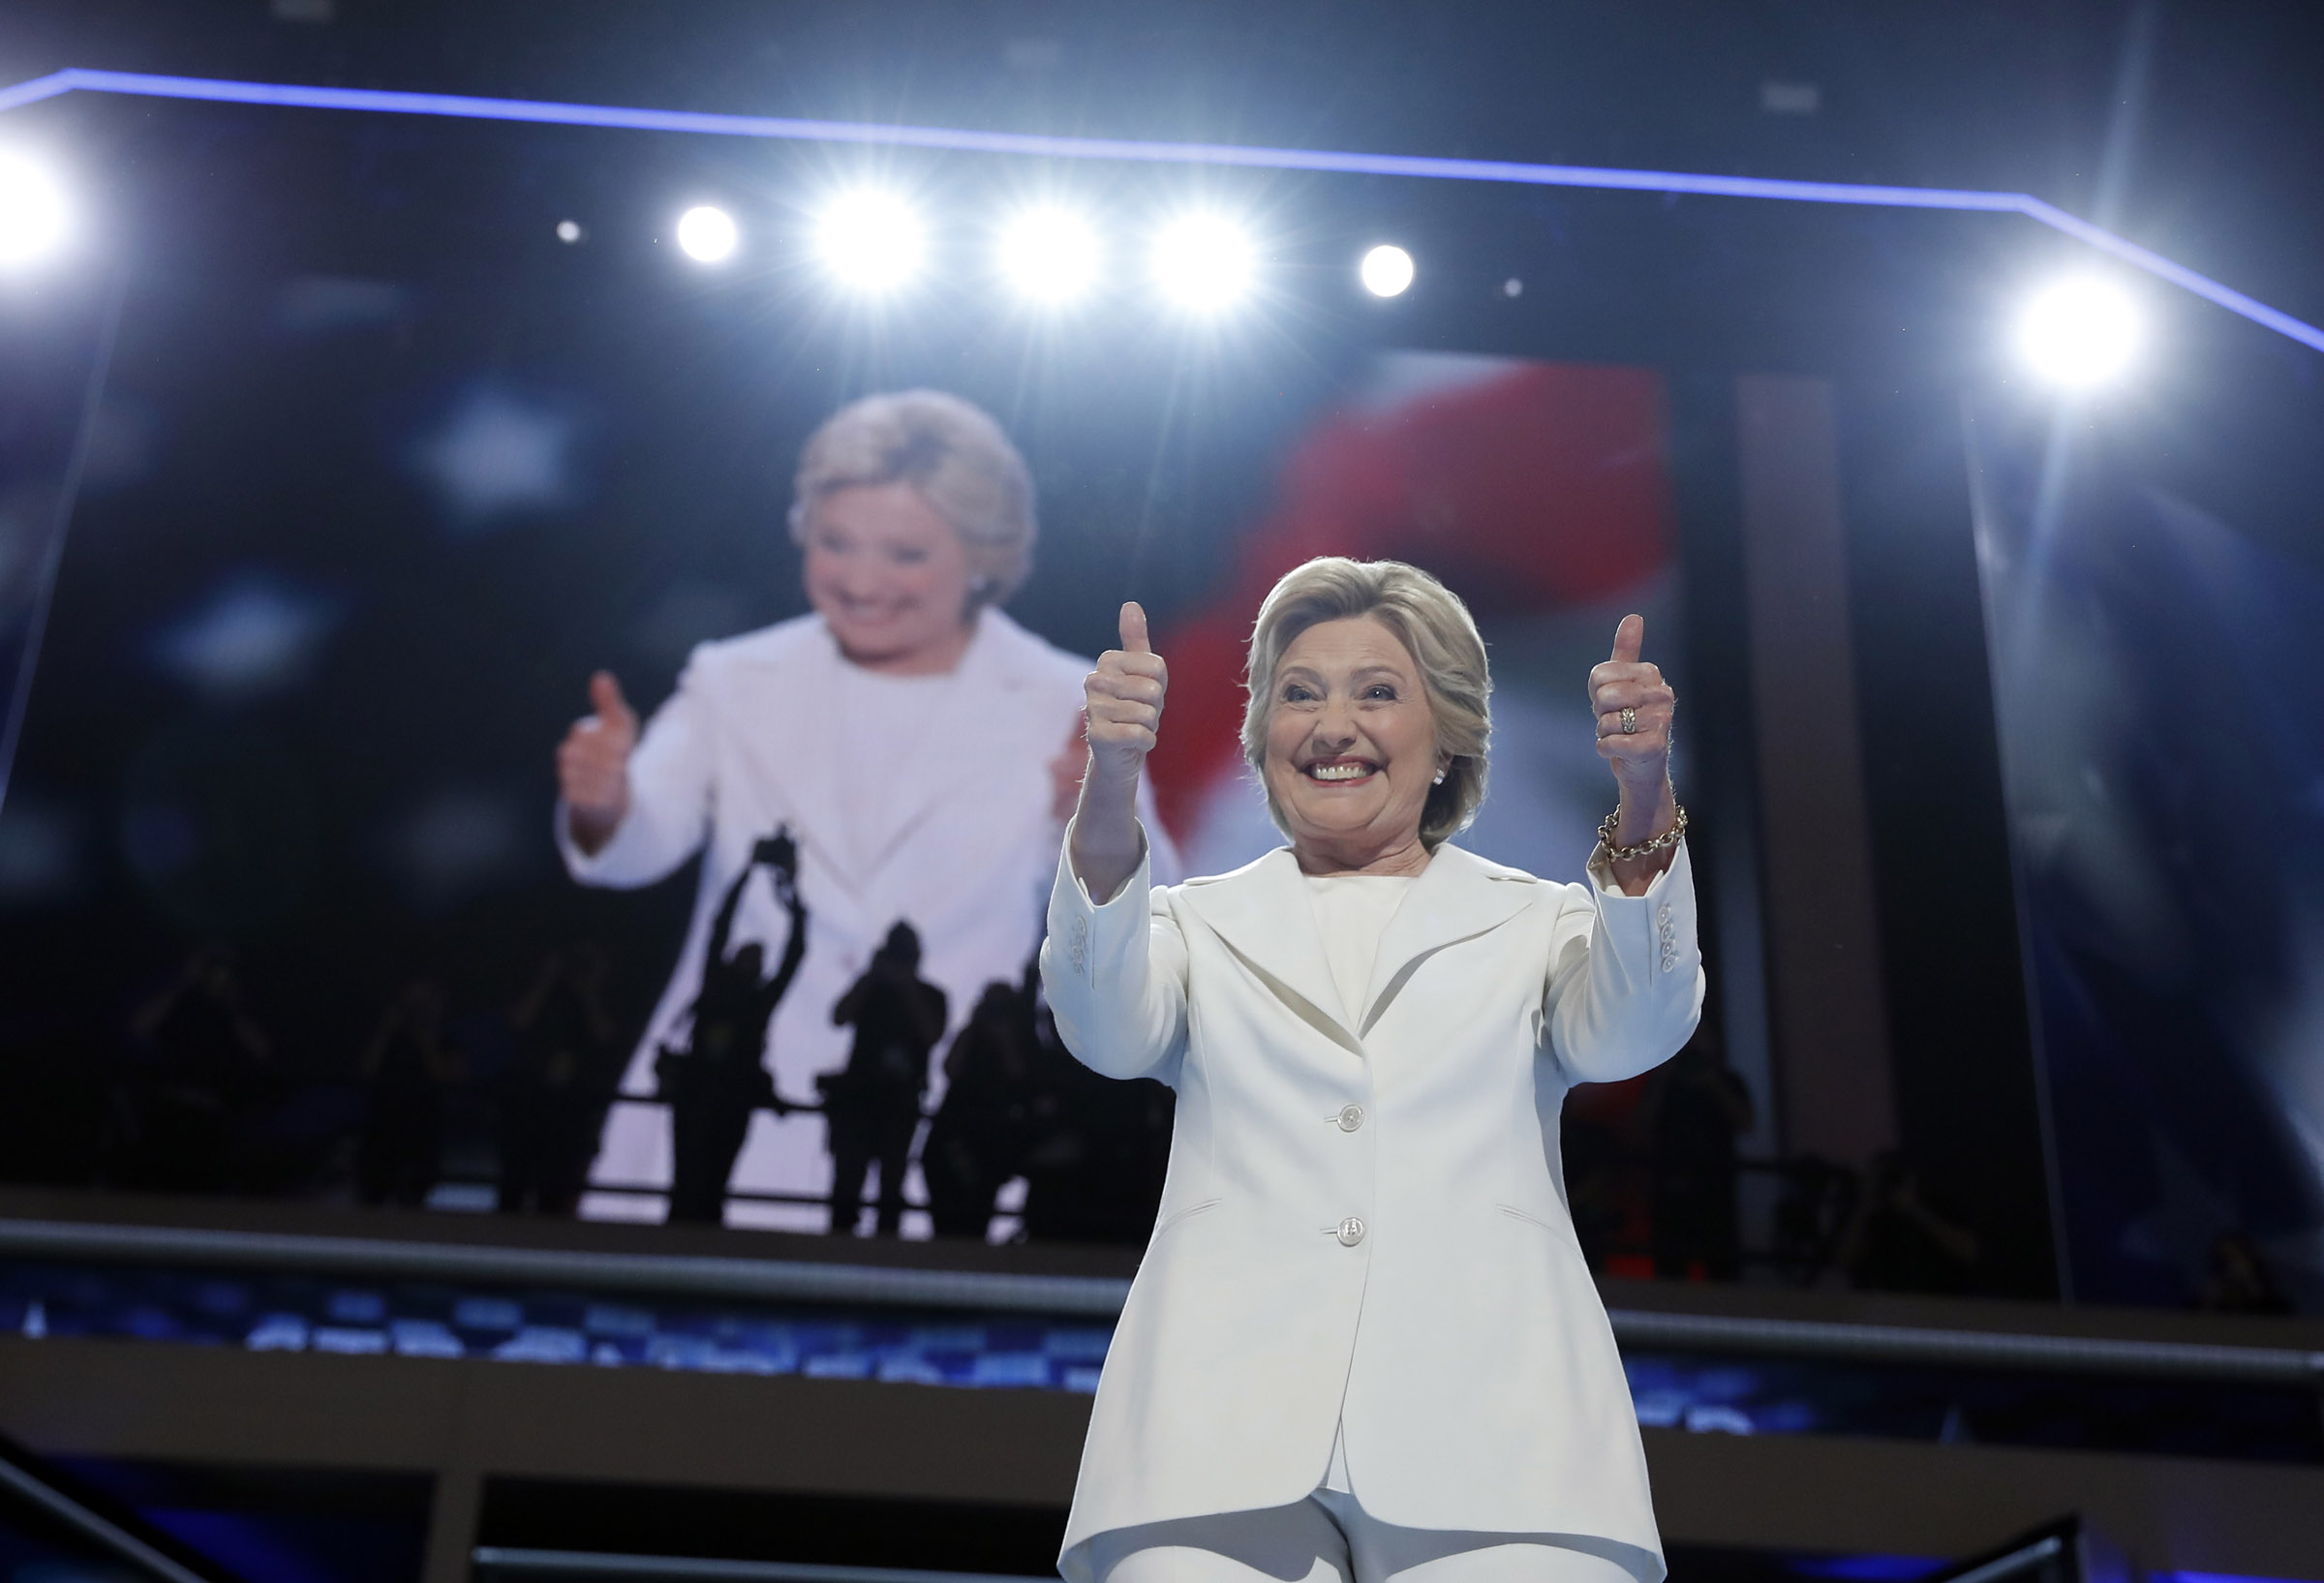 GALLERY: Democratic National Convention – Day 4